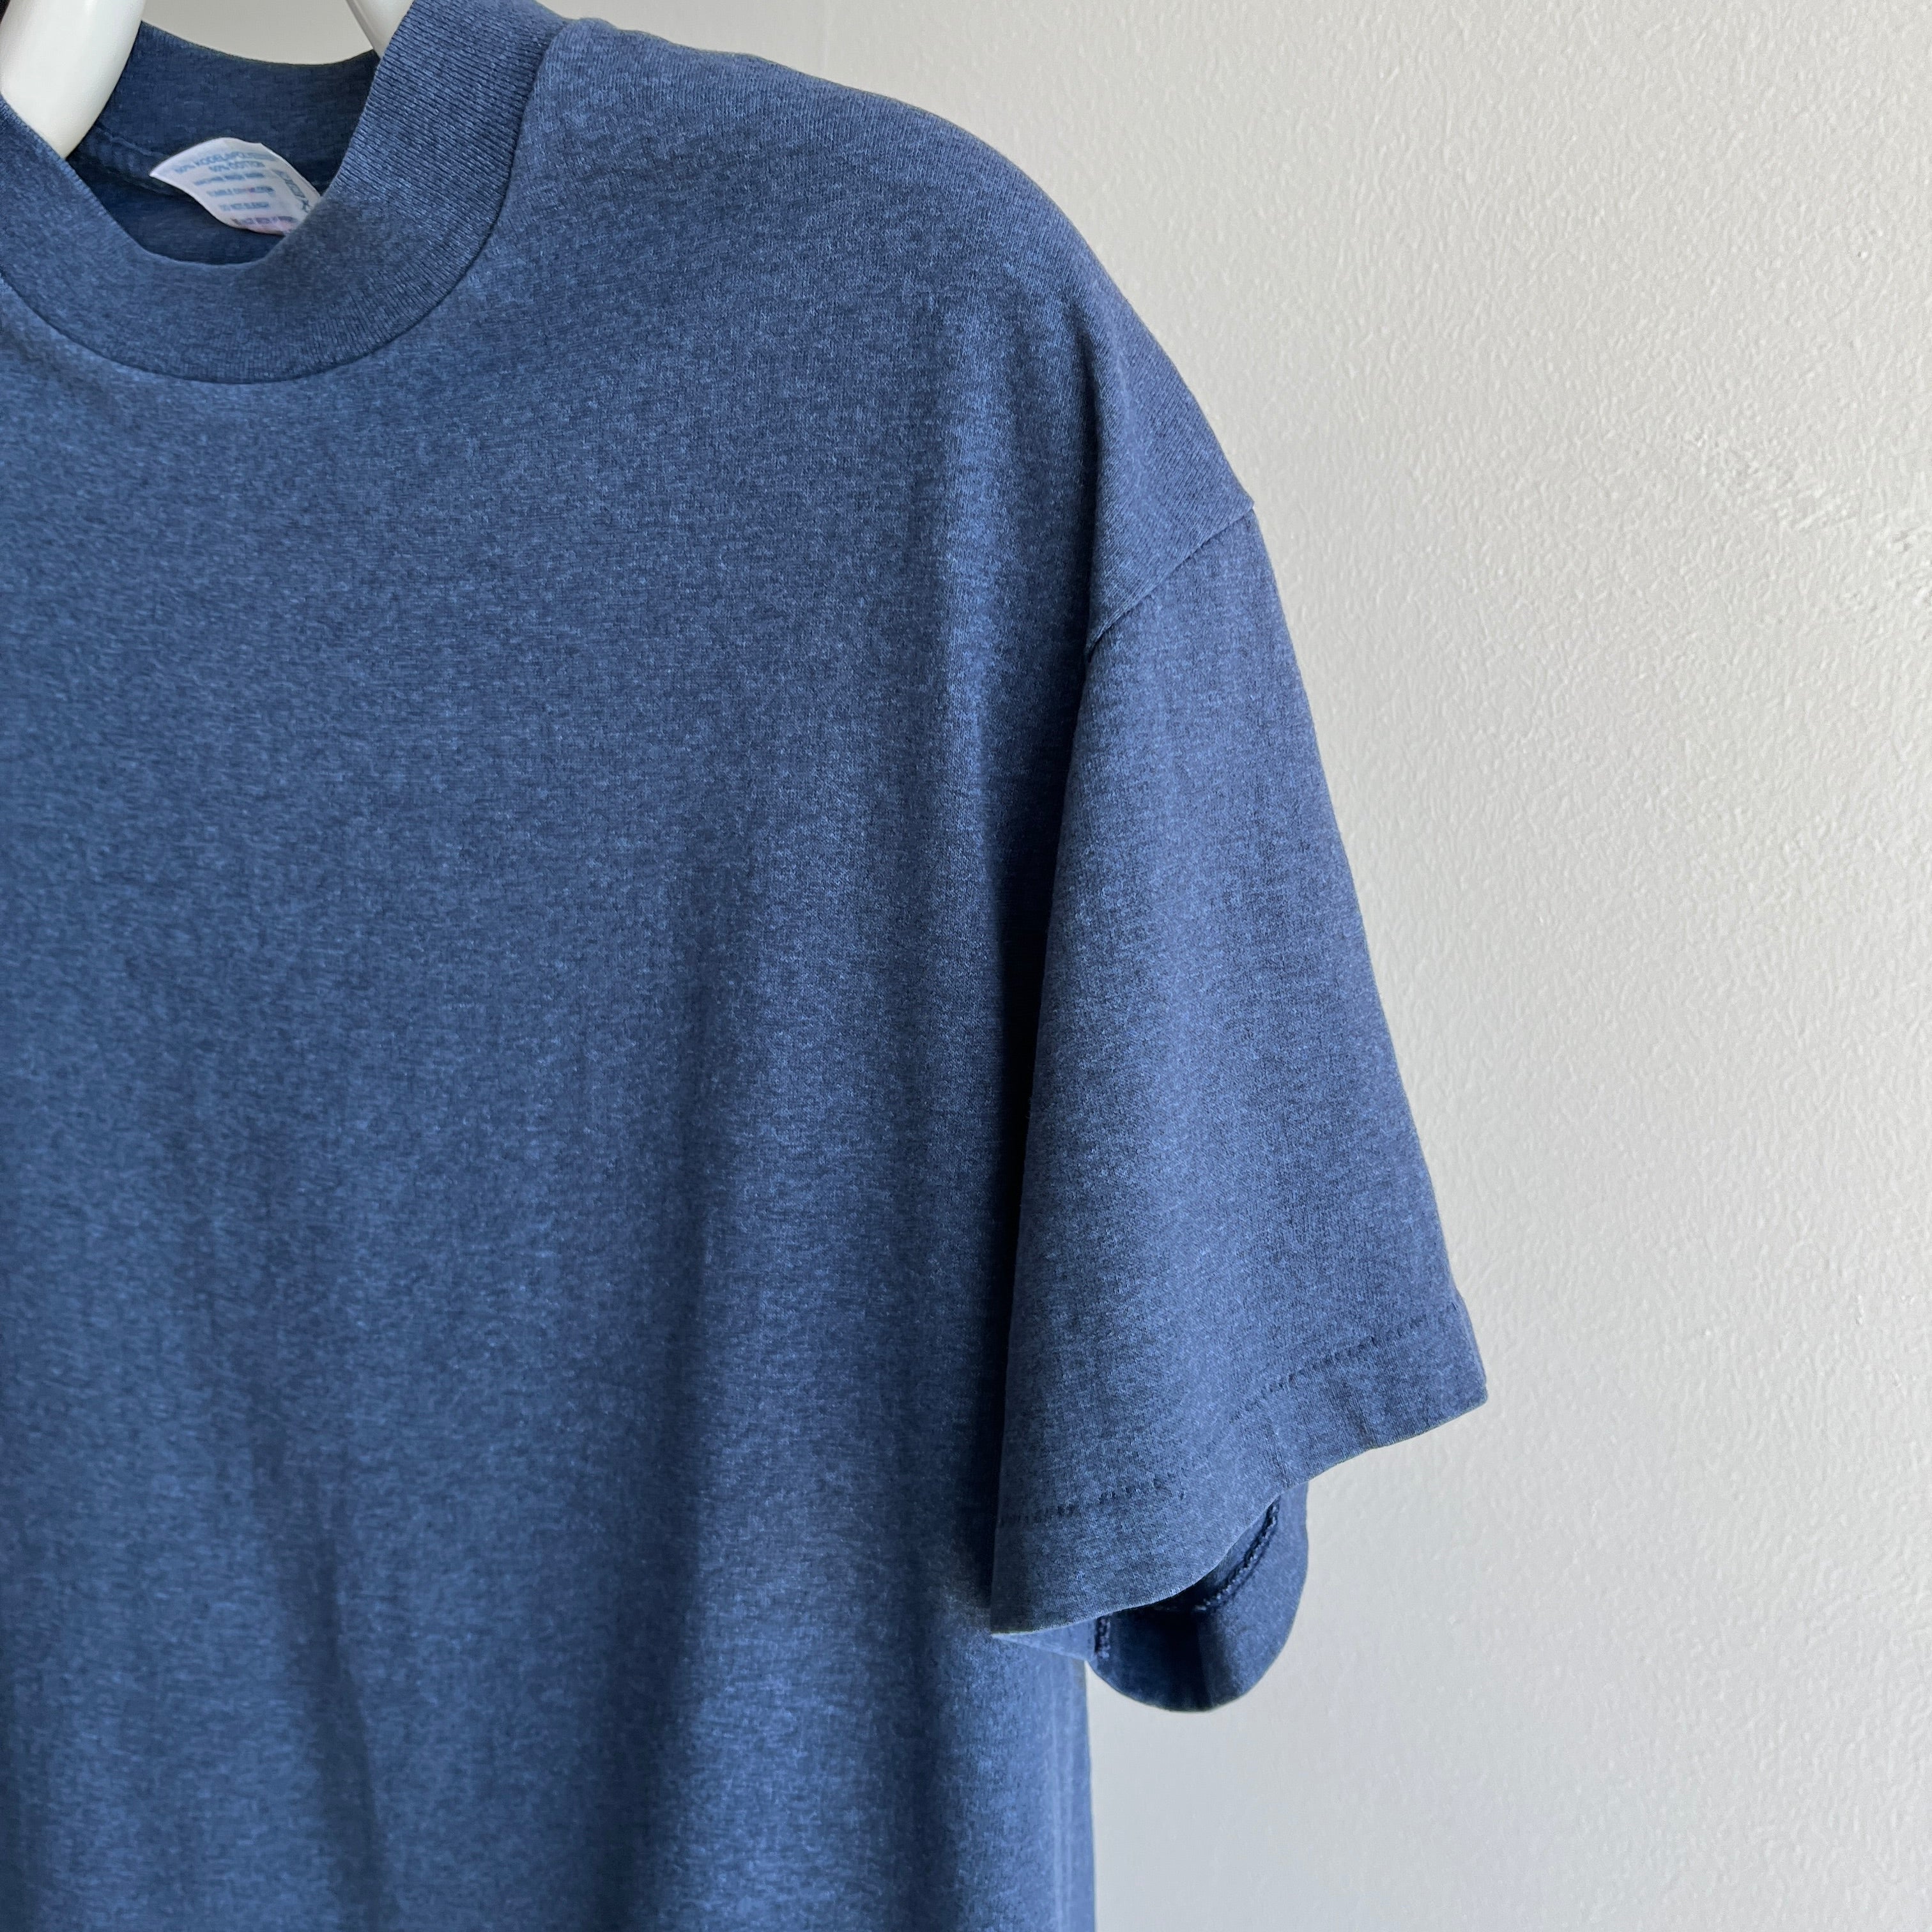 1980s Absolutely Beautiful Blank Navy T-Shirt - Above Average